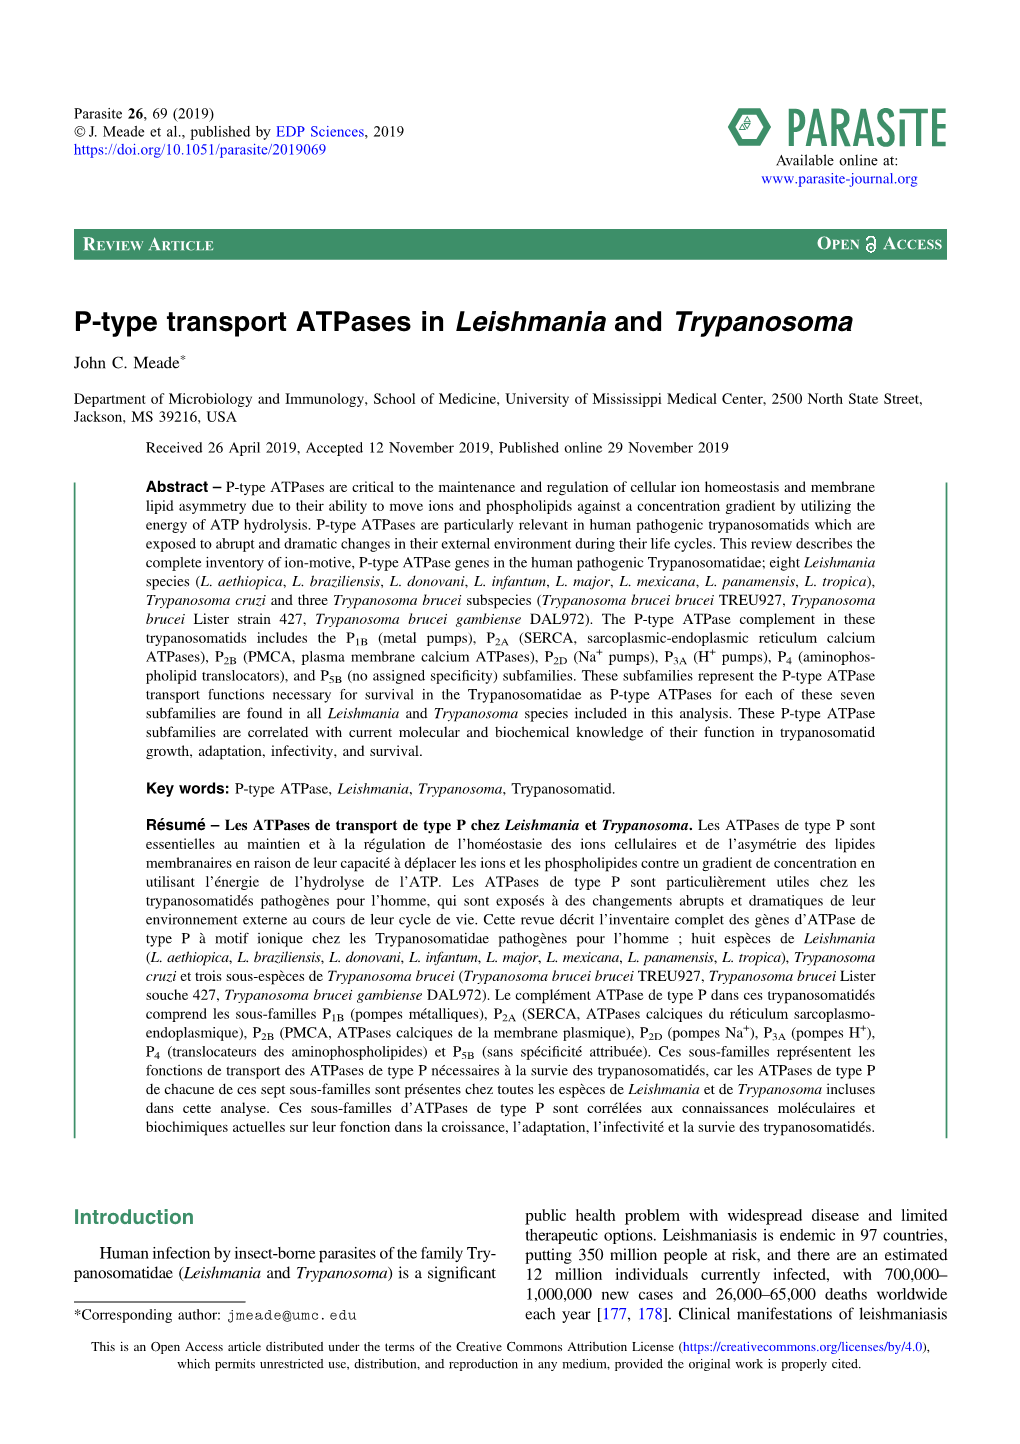 P-Type Transport Atpases in Leishmania and Trypanosoma